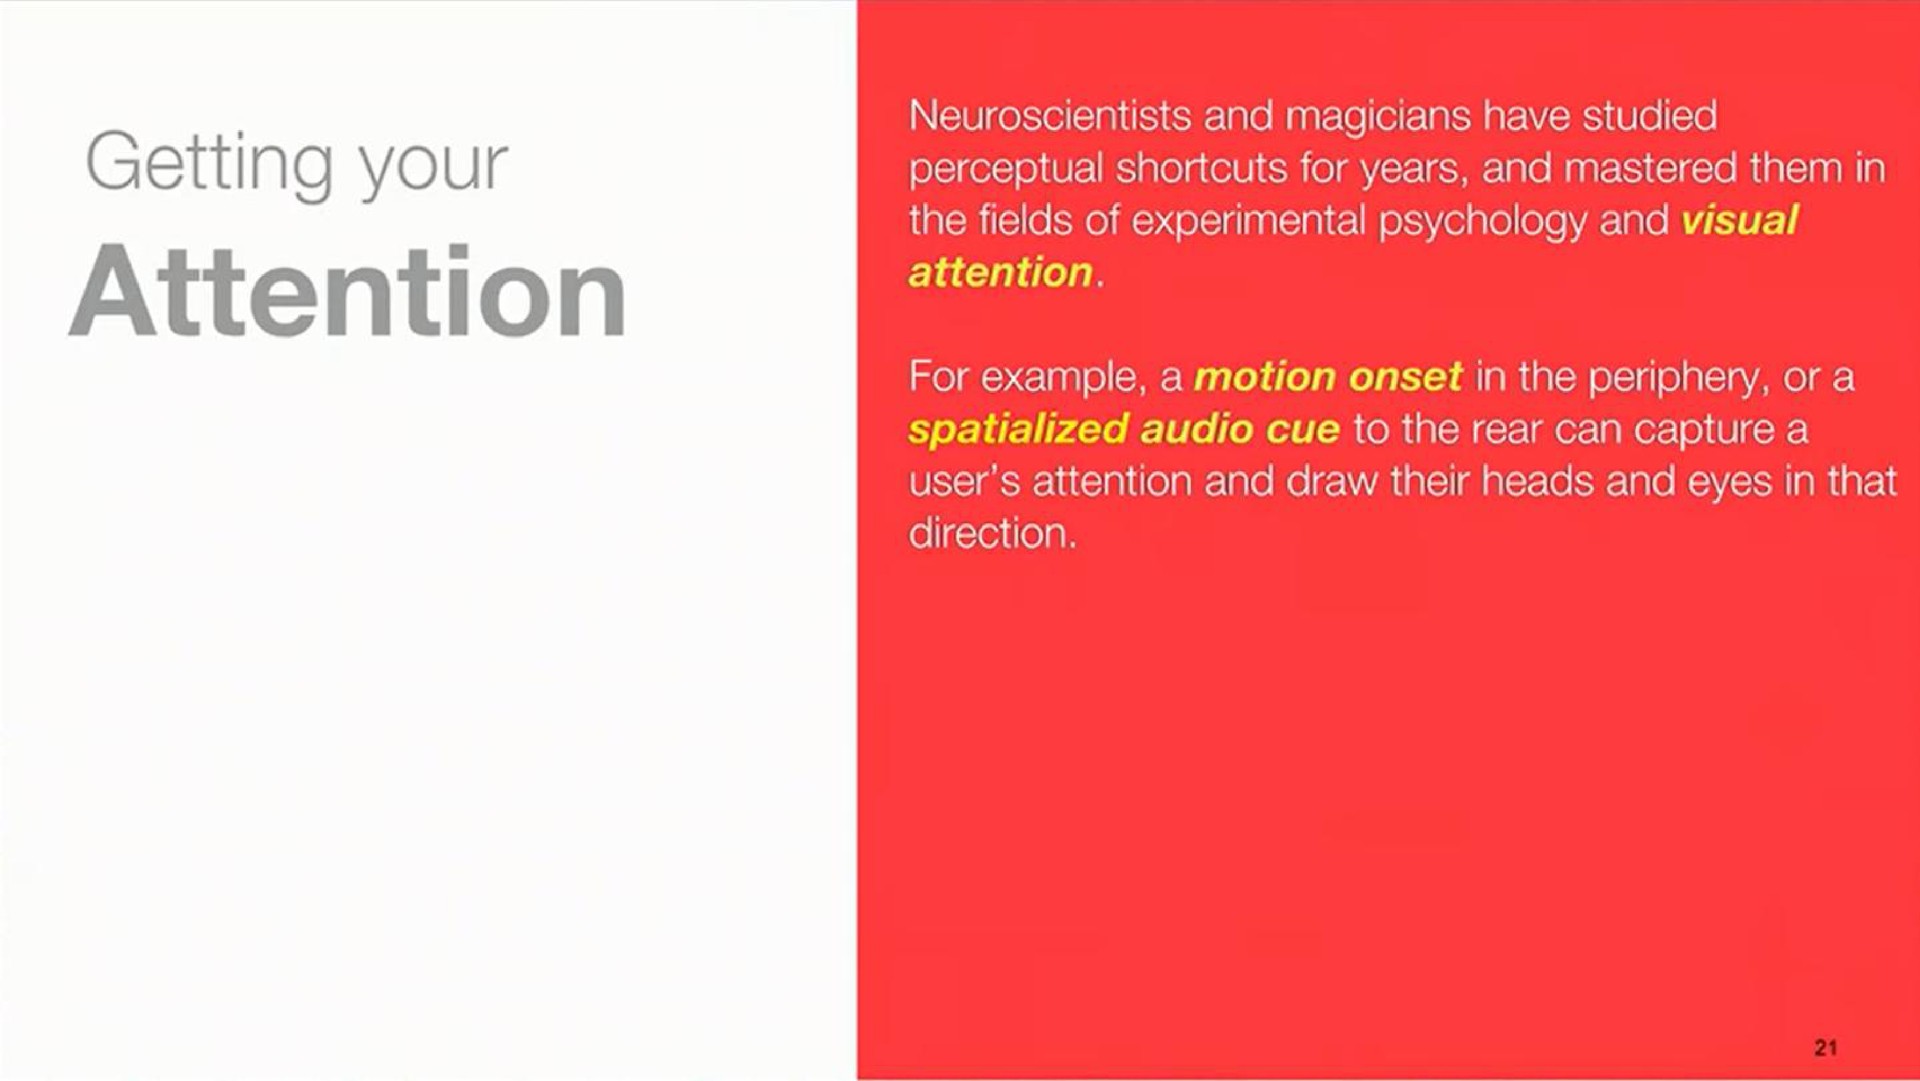 getting your attention and magicians have studied perceptual for years and mastered them in the fields of experimental psychology and visual attention for example a motion onset in the periphery or a audio cue to the rear can capture a user attention and draw their heads and eyes in that direction | Magic Leap